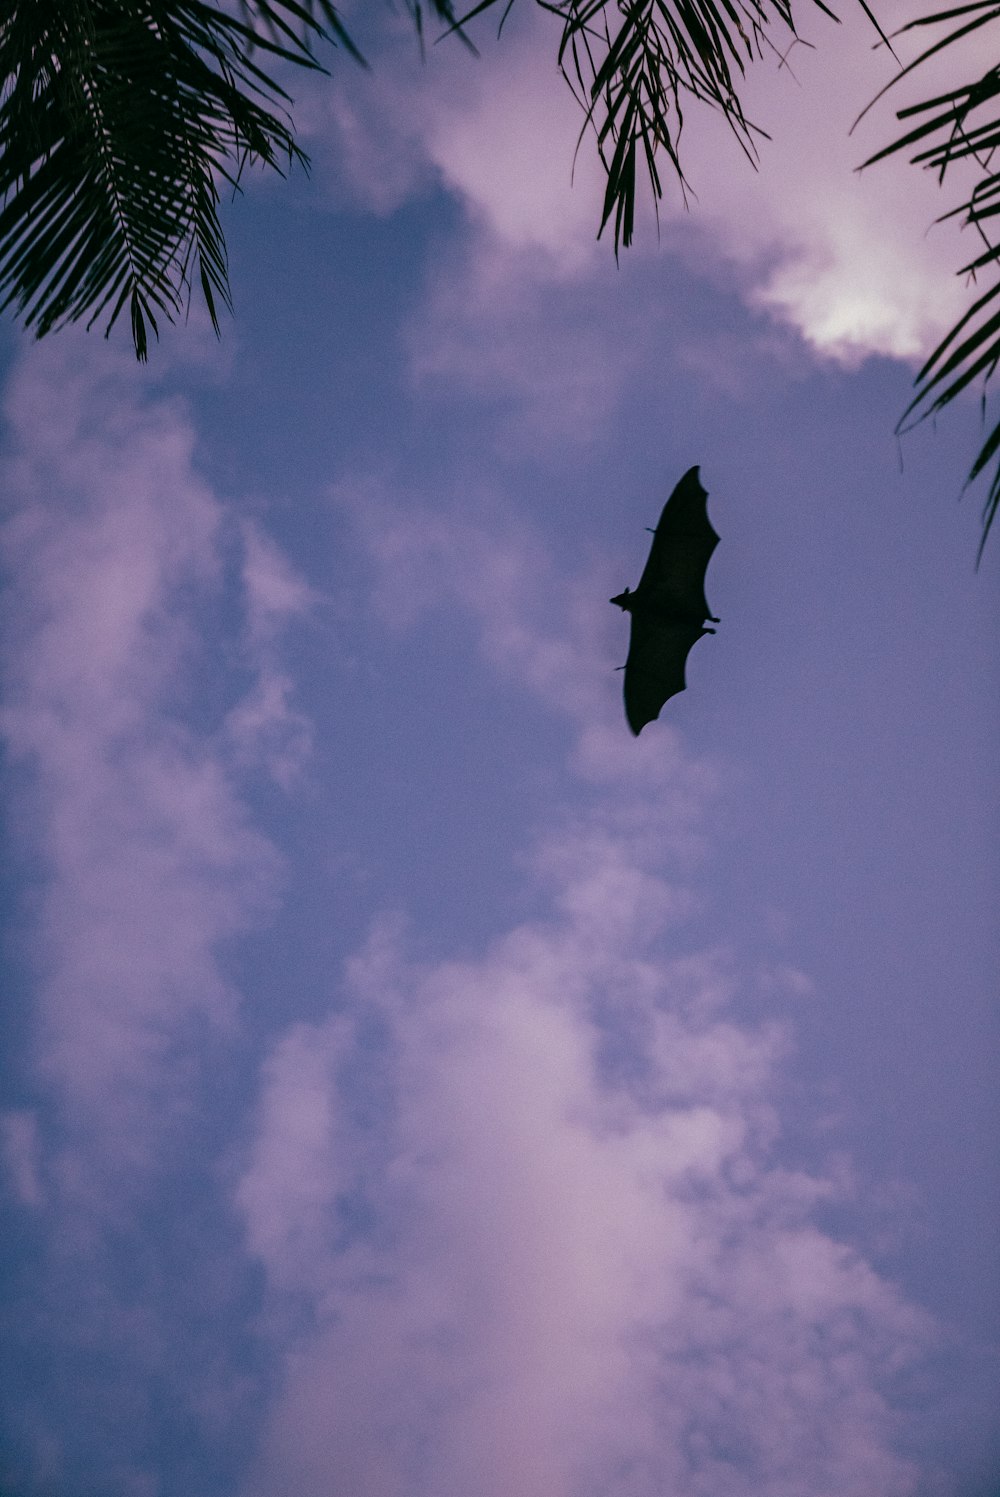 a bat flying high up in the sky